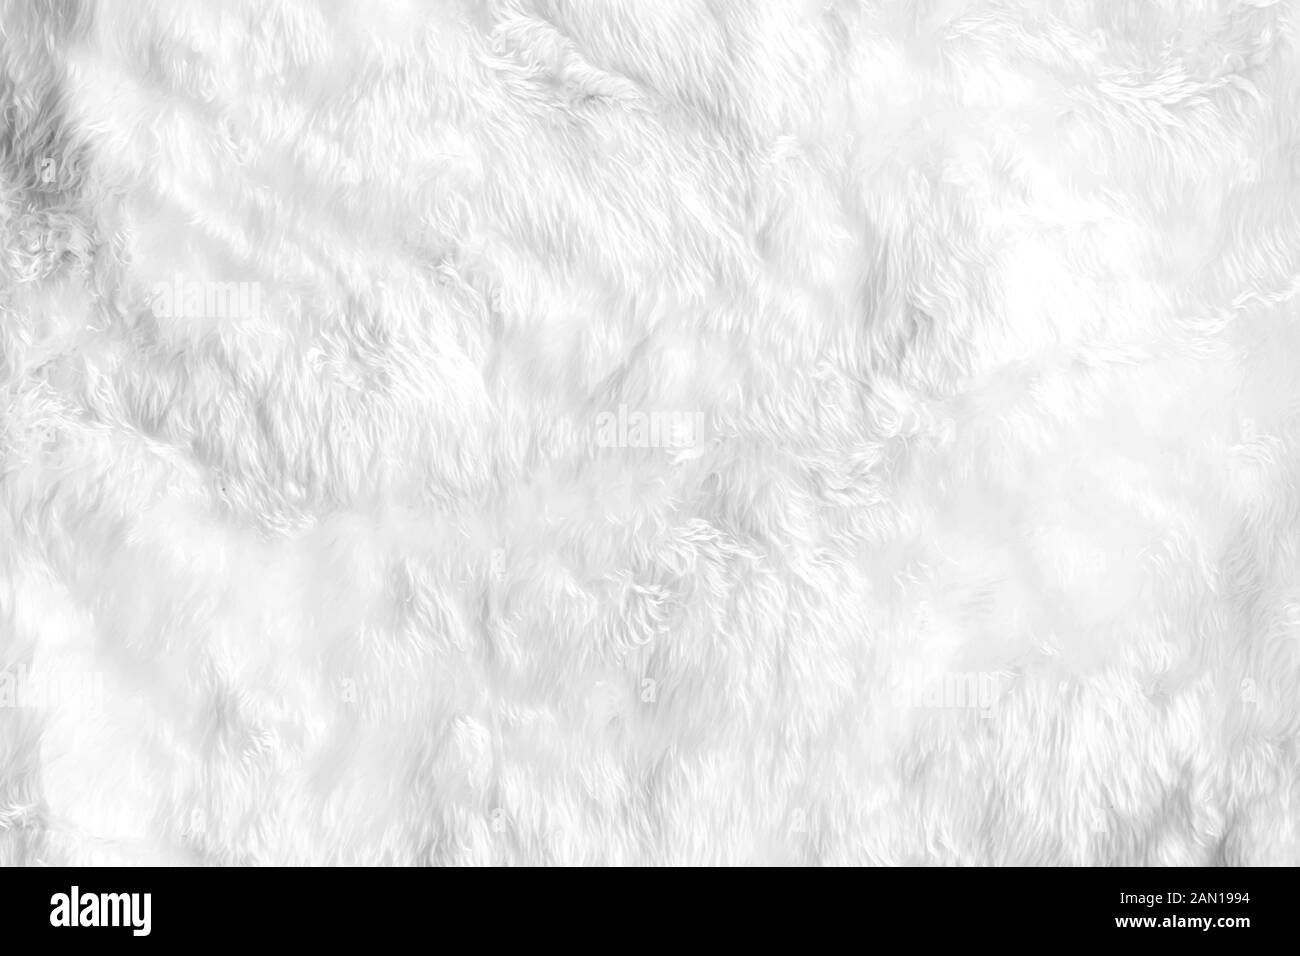 Closeup animal white wool sheep background in top view light natural detail, grey fluffy seamless cotton texture. Wrinkled lamb fur coat skin, rug mat Stock Photo